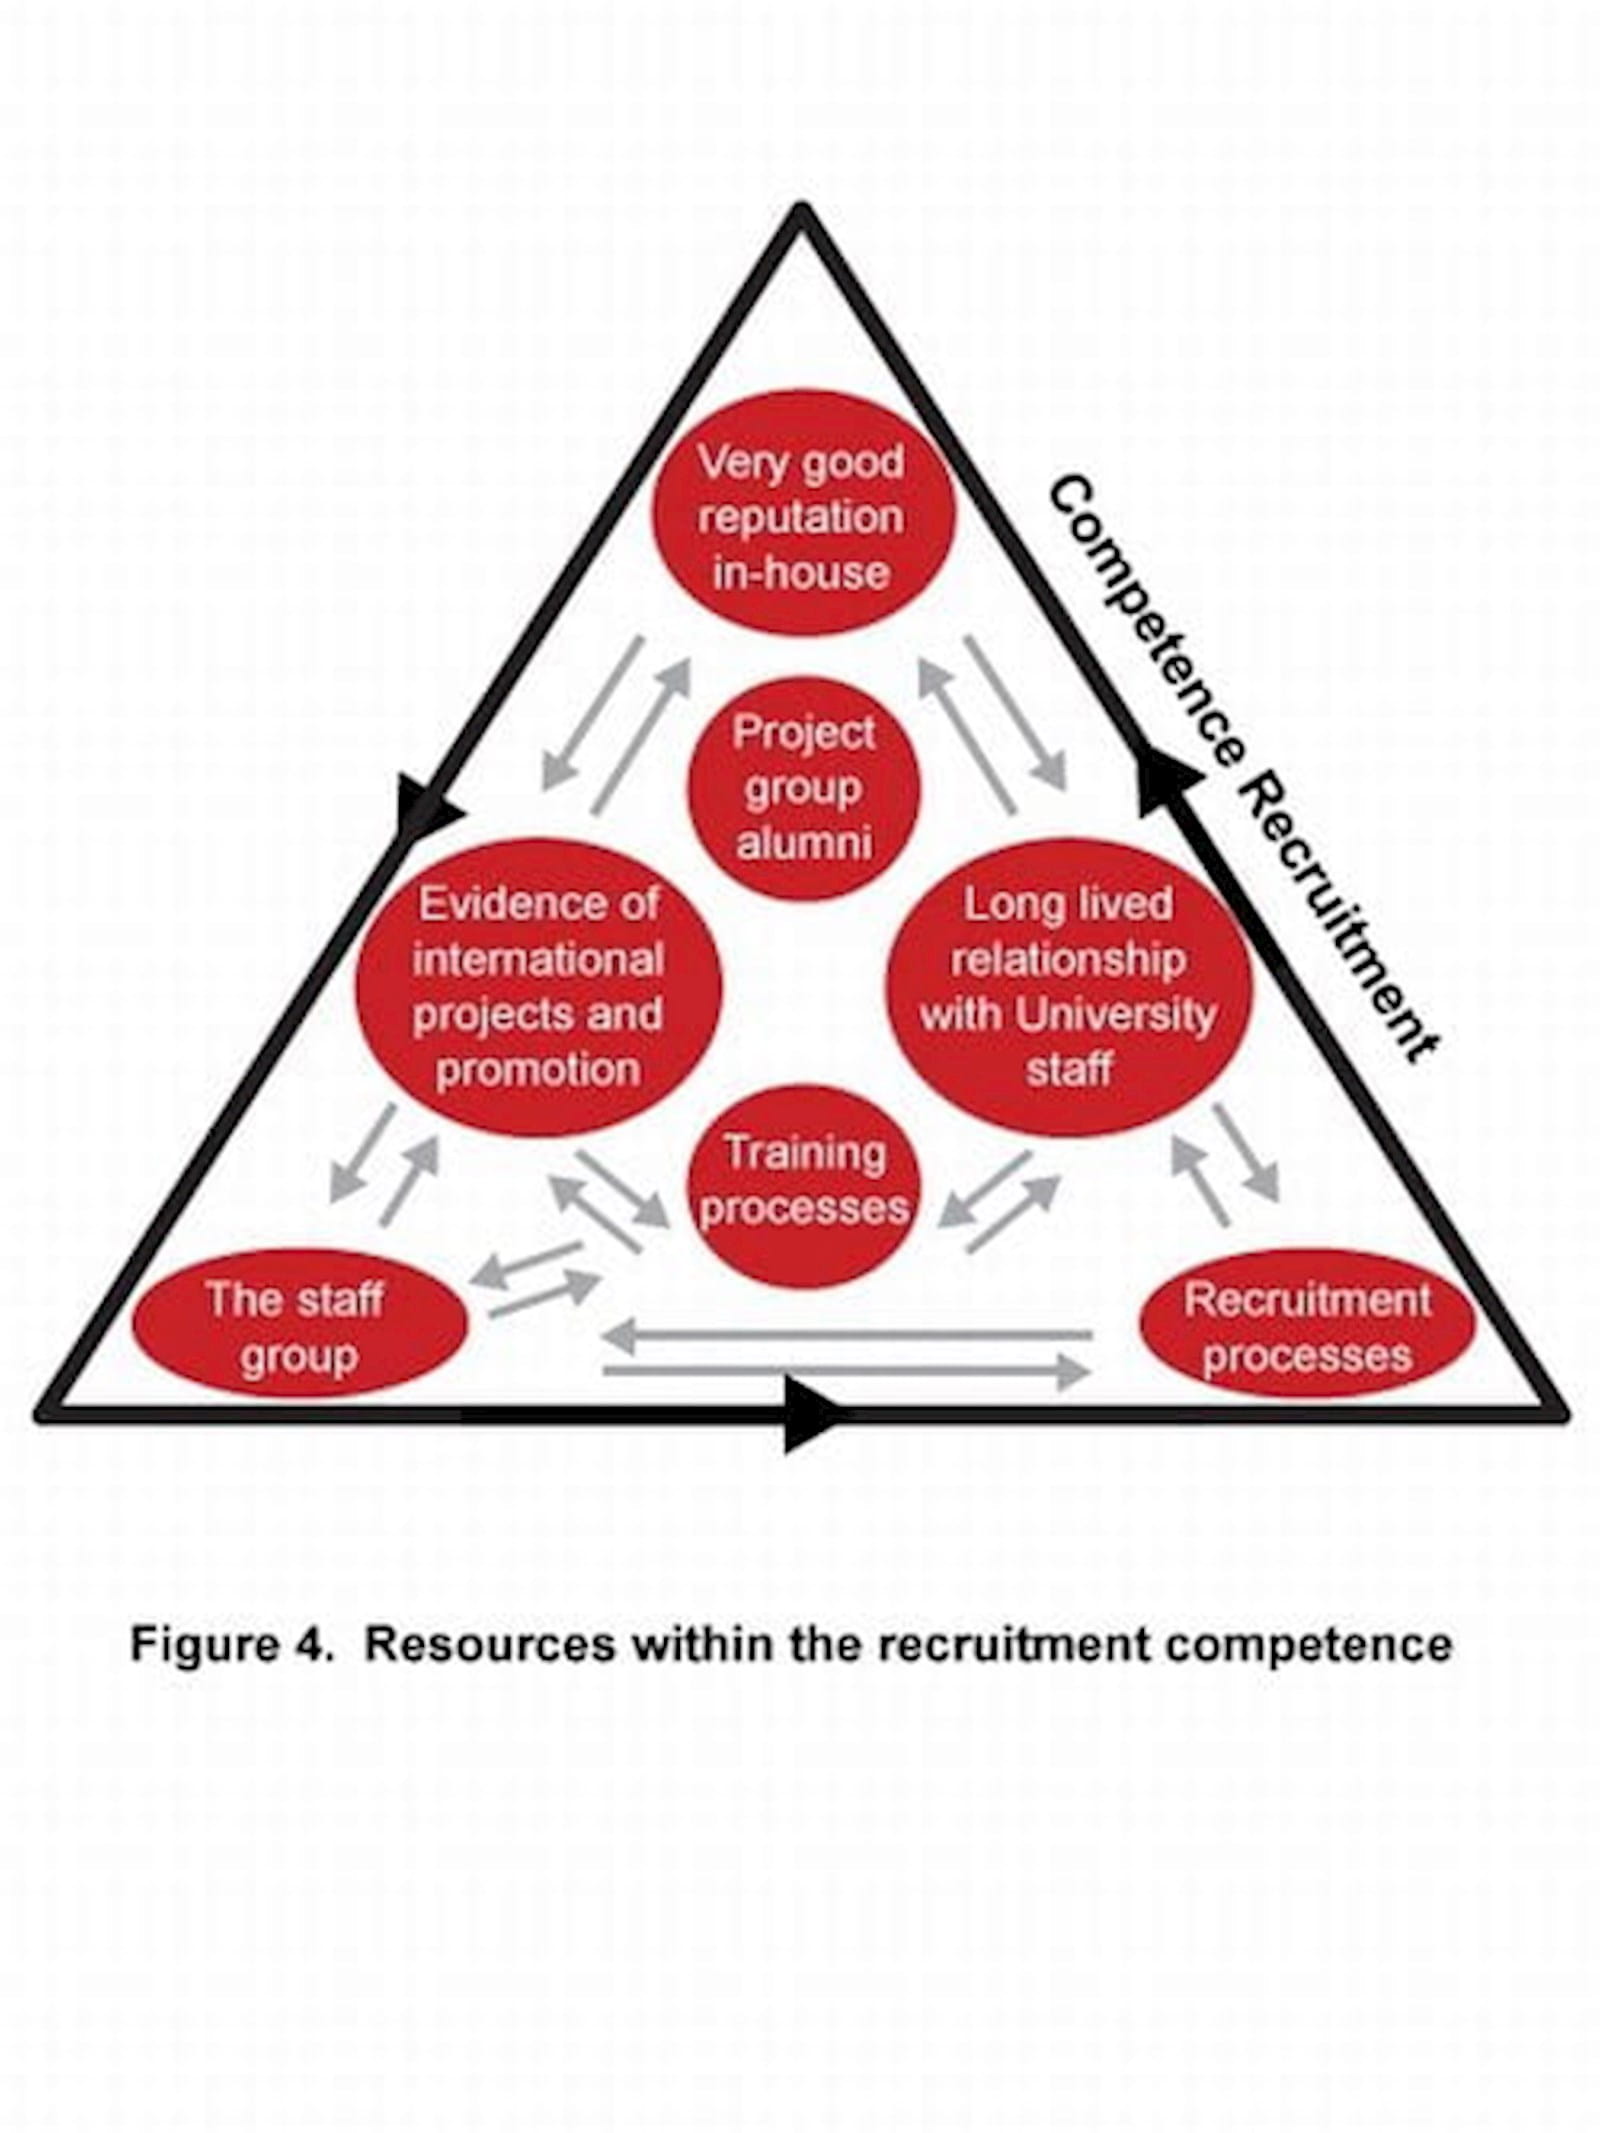 Fig 4 Resources within recruitment competence